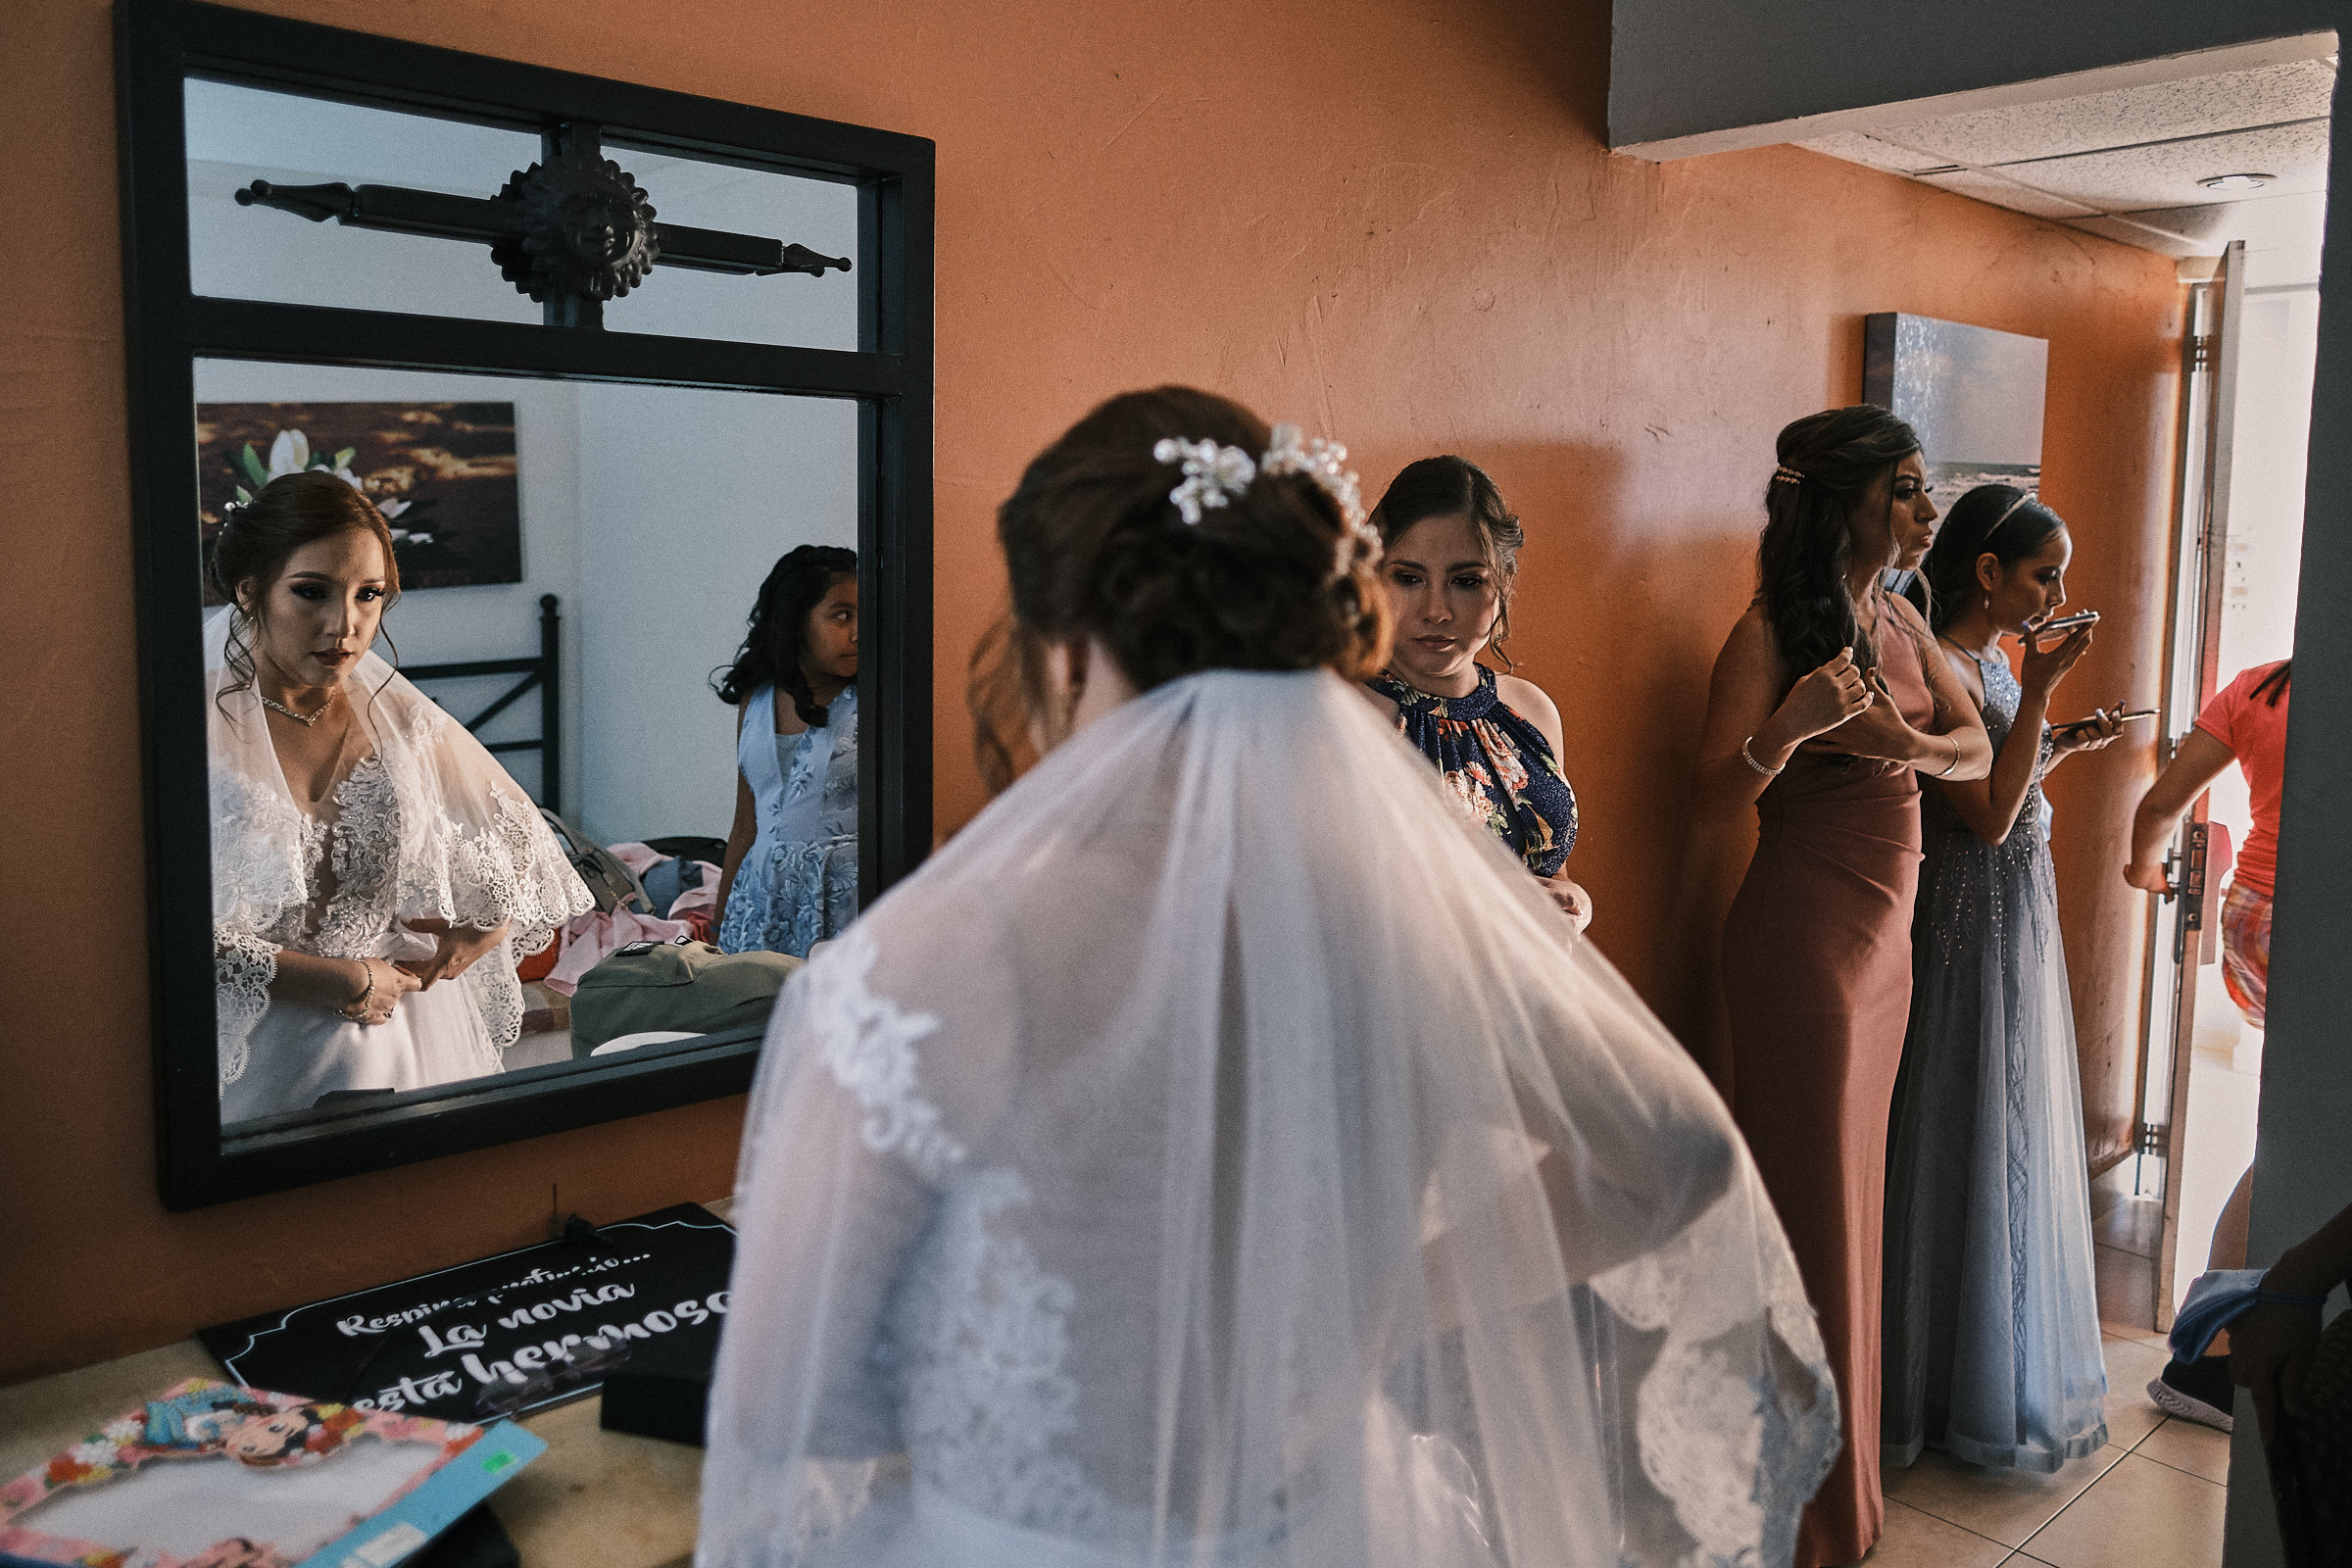 someone walks out the room as the bride is getting the last touches on her dress